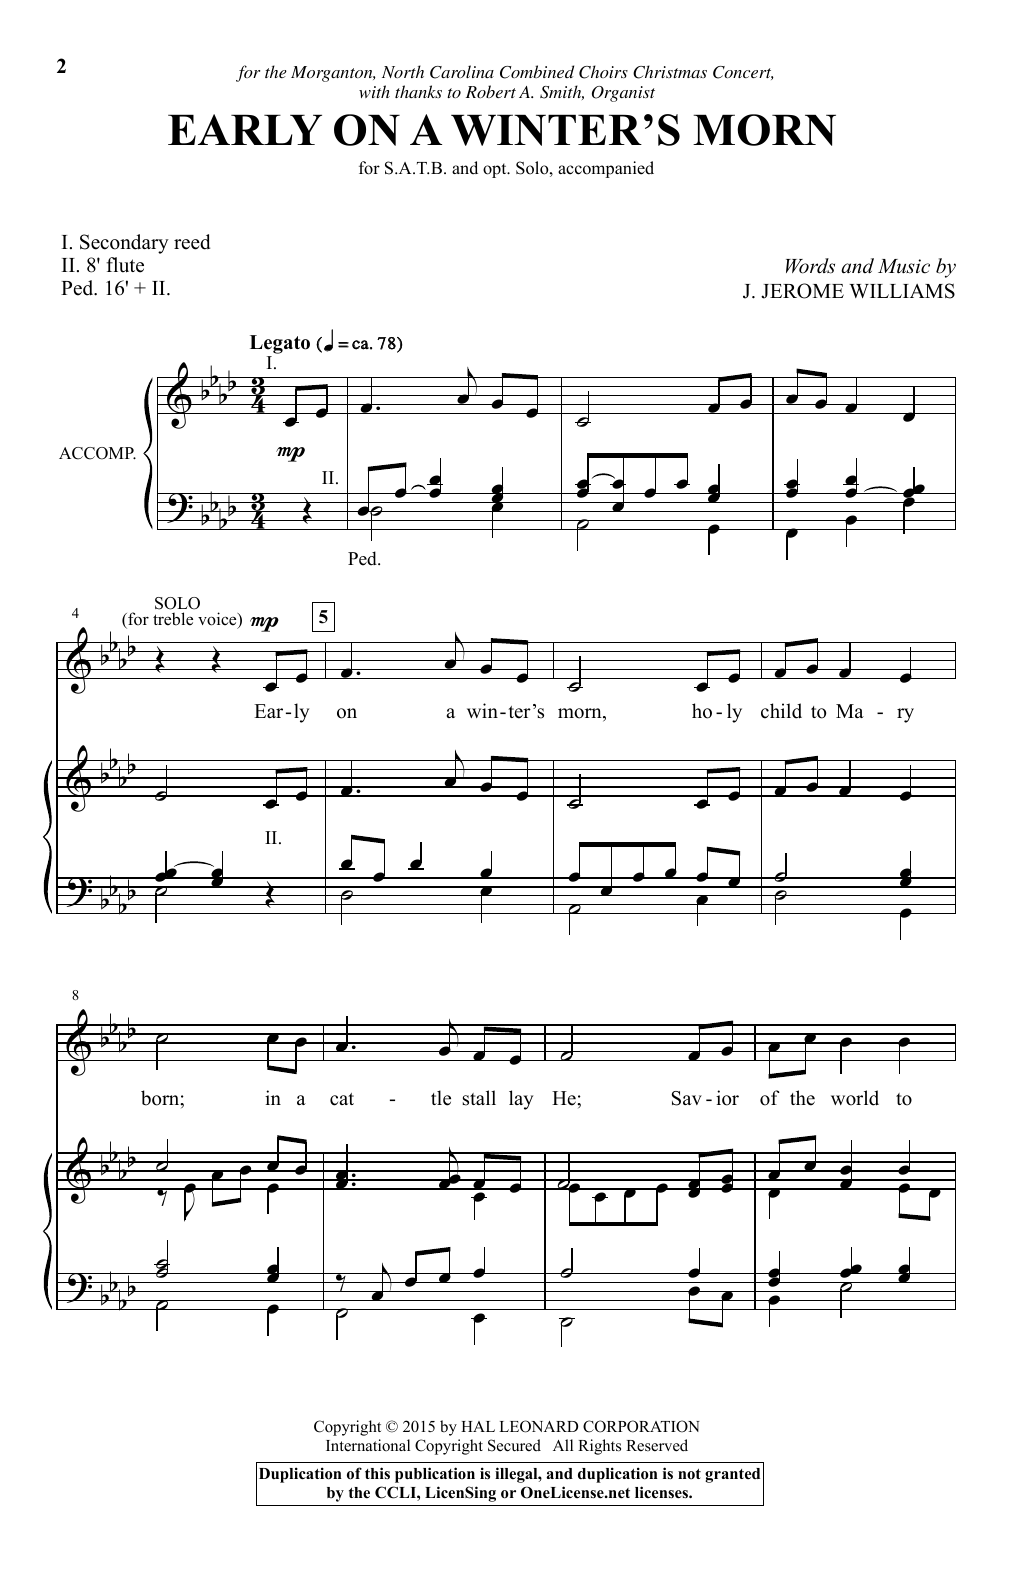 Download J. Jerome Williams Early On A Winter's Morn Sheet Music